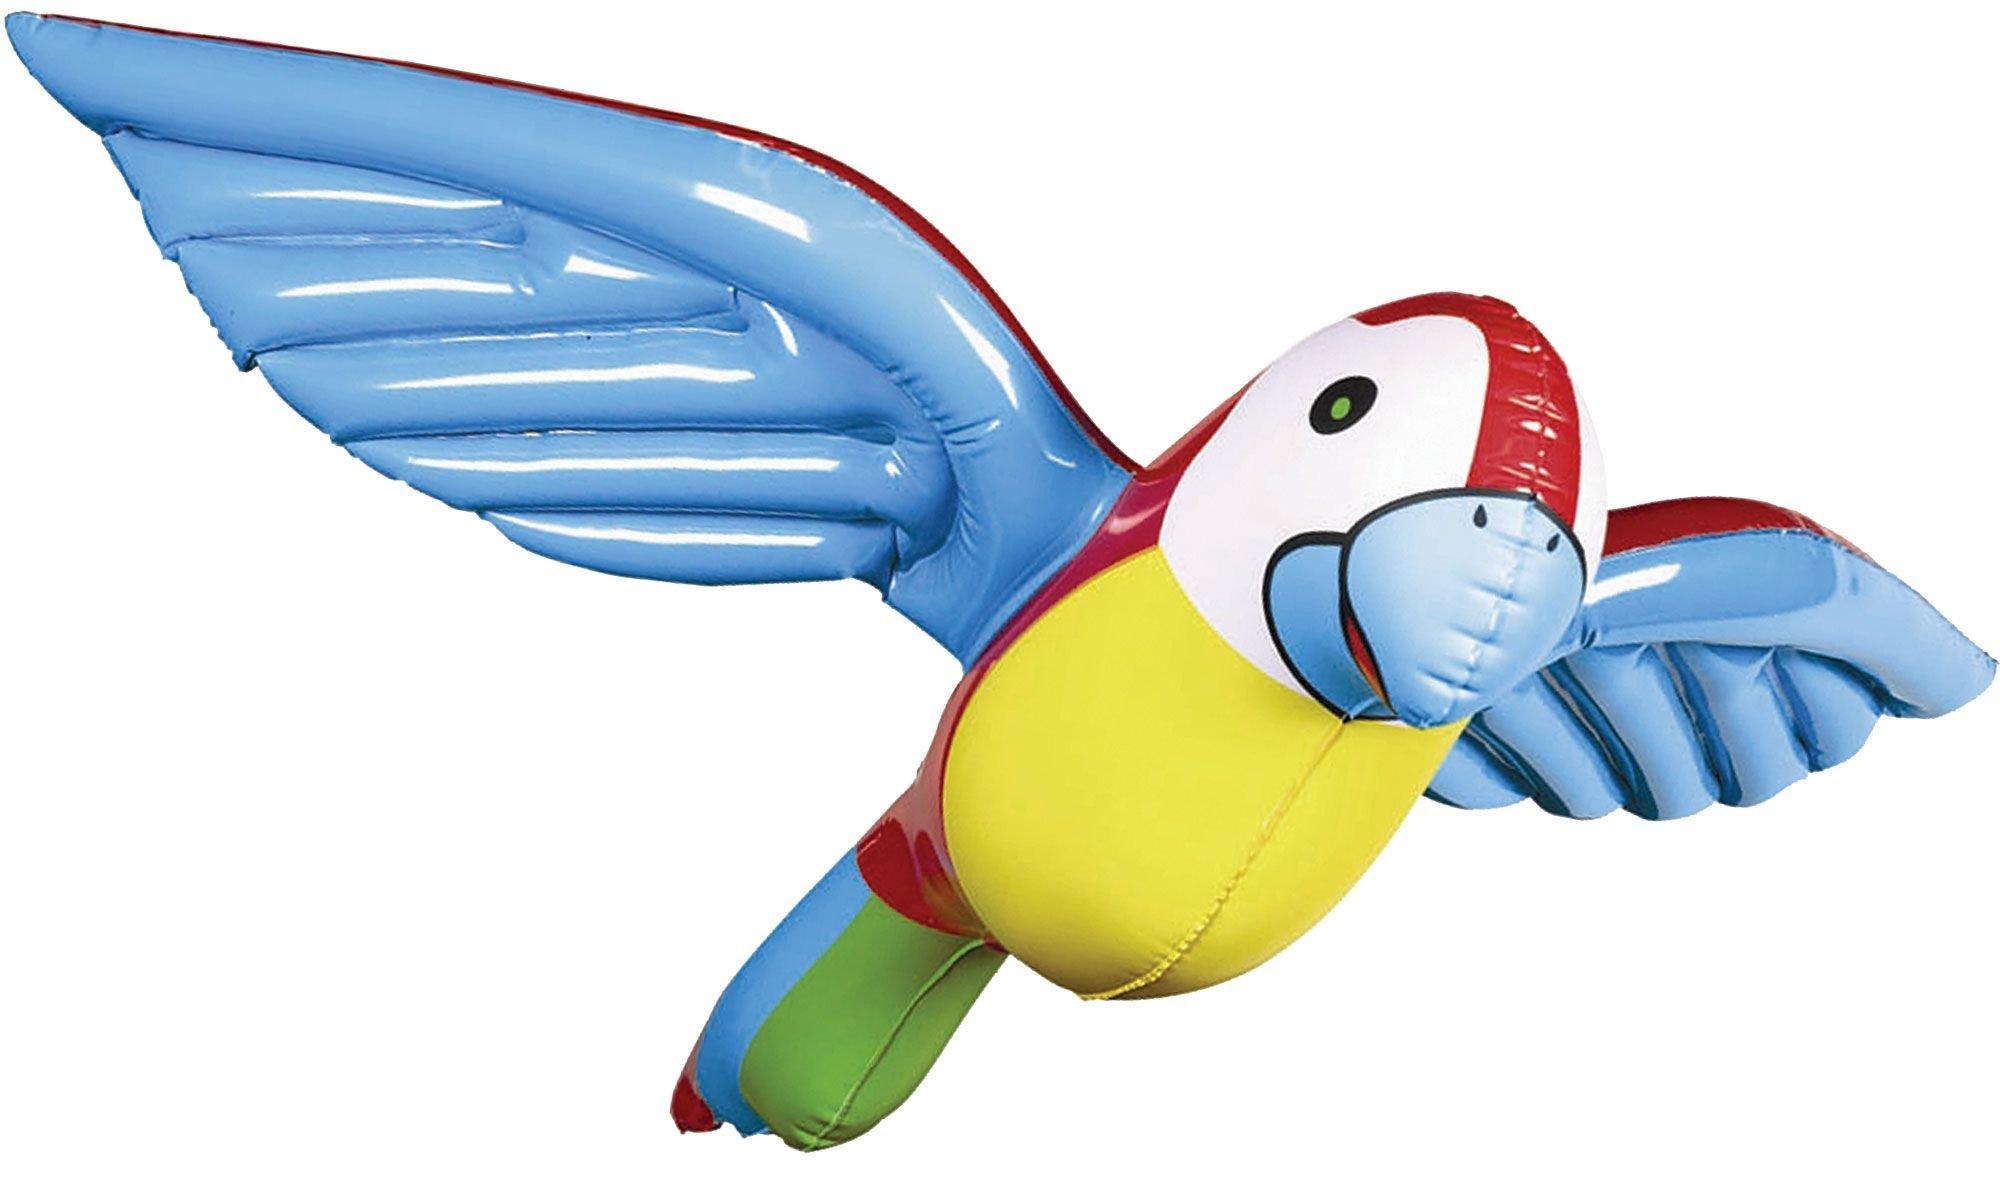 Inflatable Flying Parrot